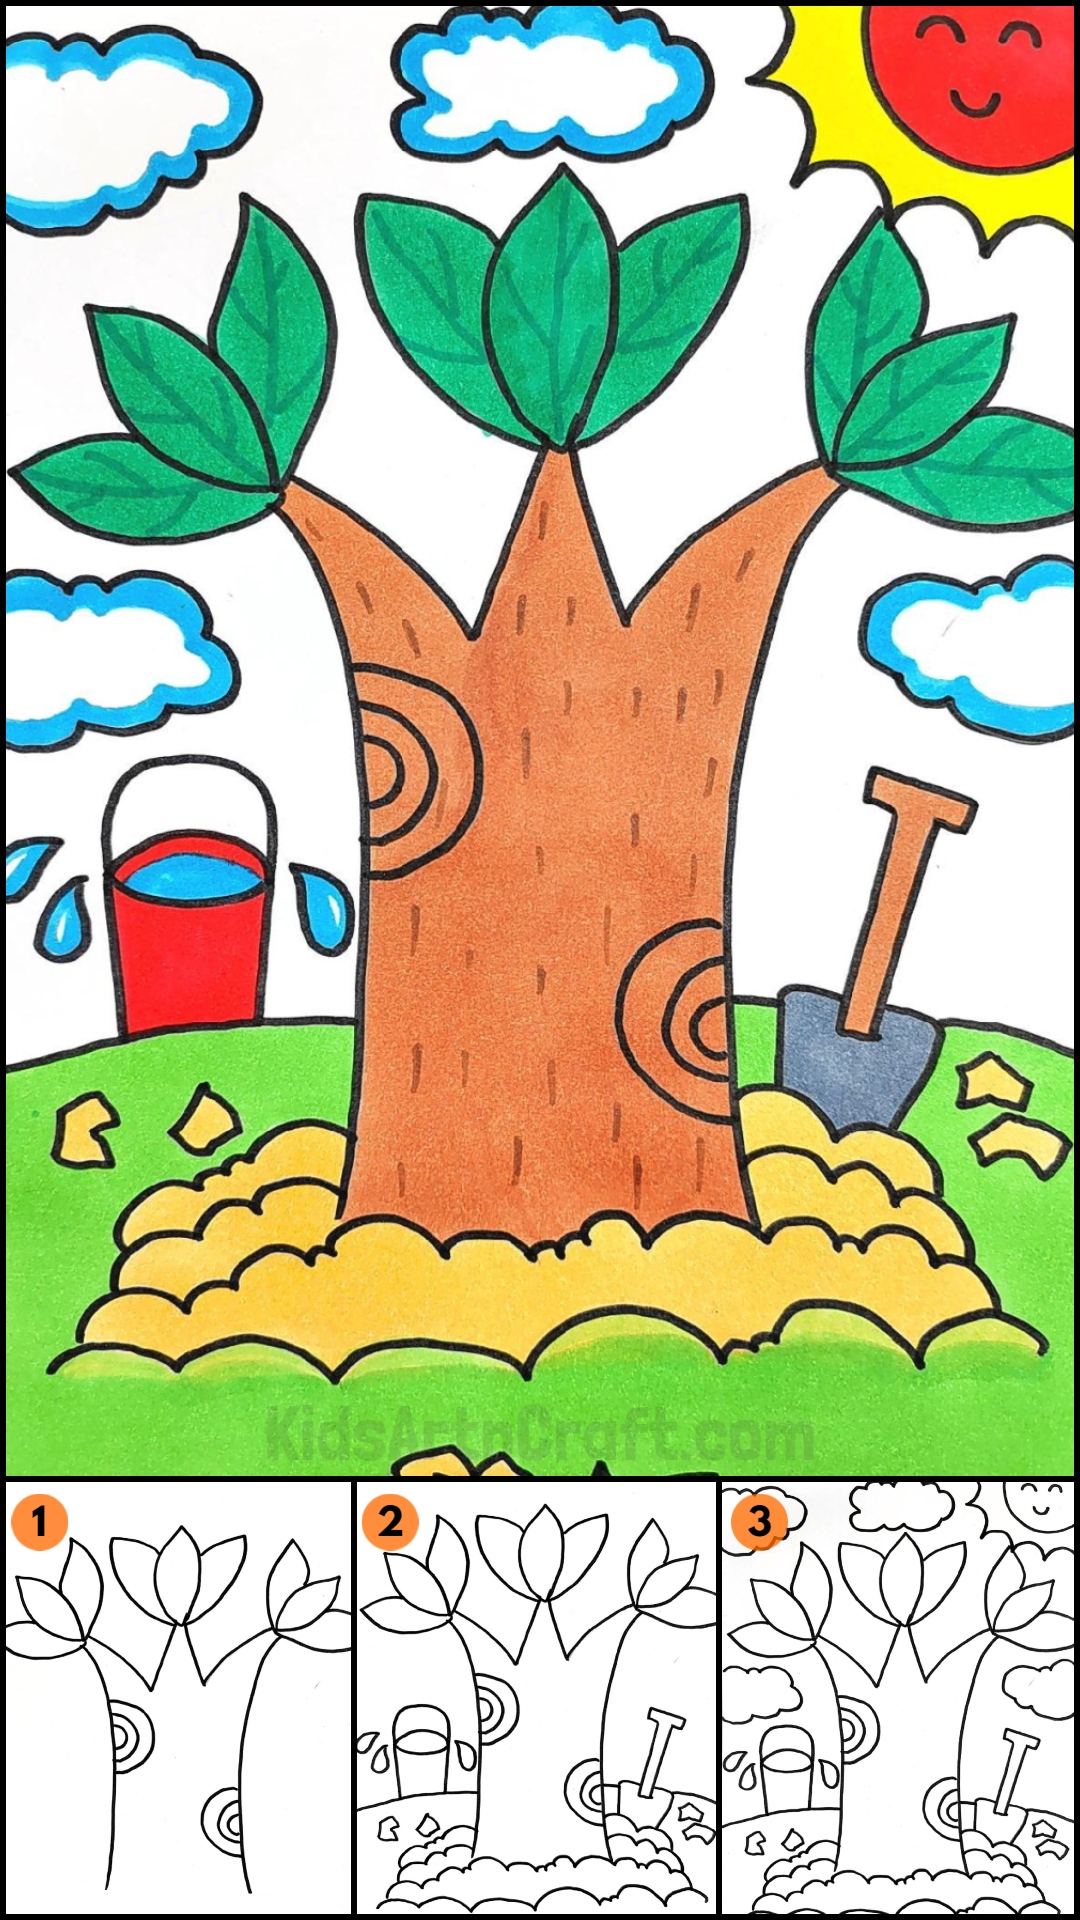 World Environment day tree Drawing for kids